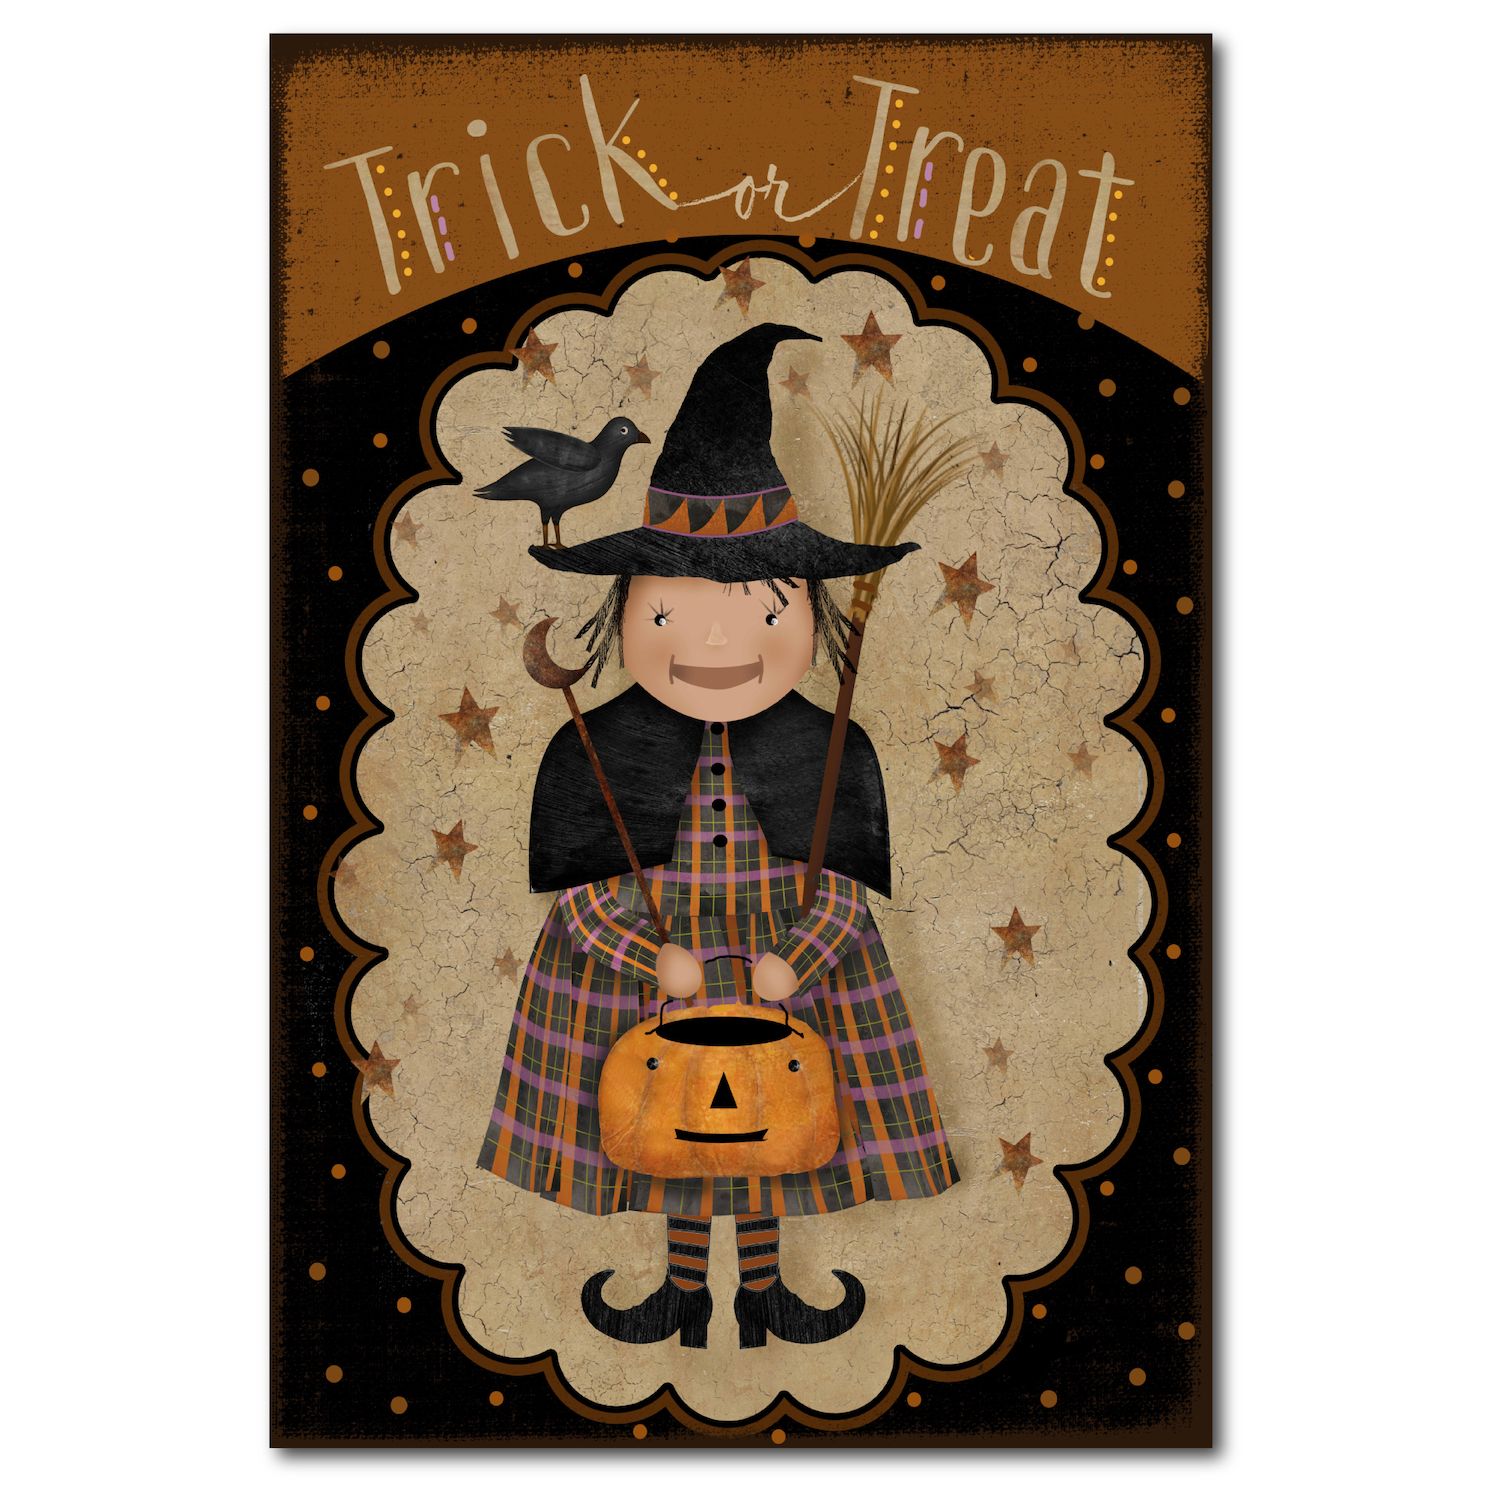 12 Battery Operated LED Witch Halloween Lantern - National Tree Company